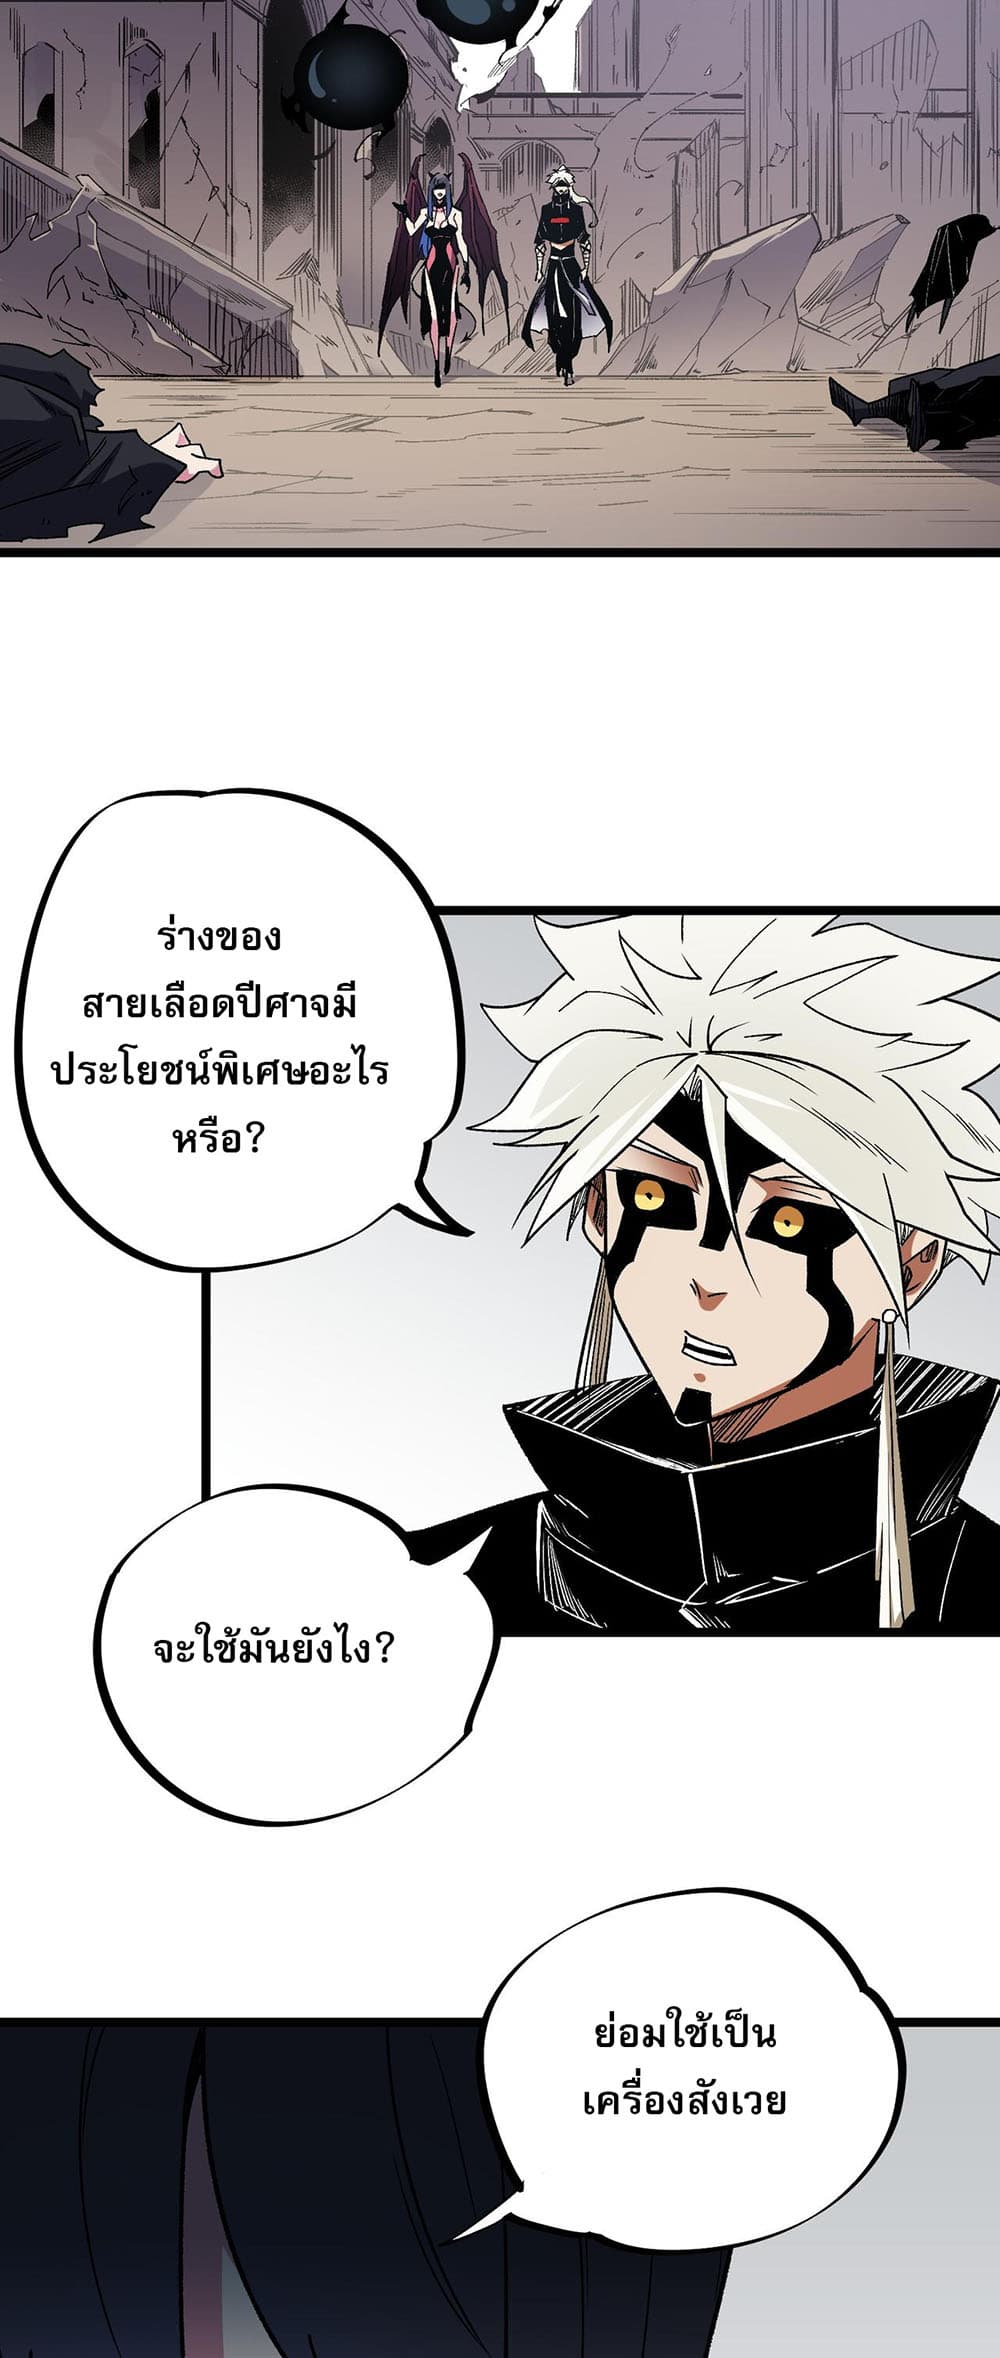 Job Changing for the Entire Population: The Jobless Me Will Terminate the Gods ฉันคือผู้เล่นไร้อาชีพที่สังหารเหล่าเทพ 55-55